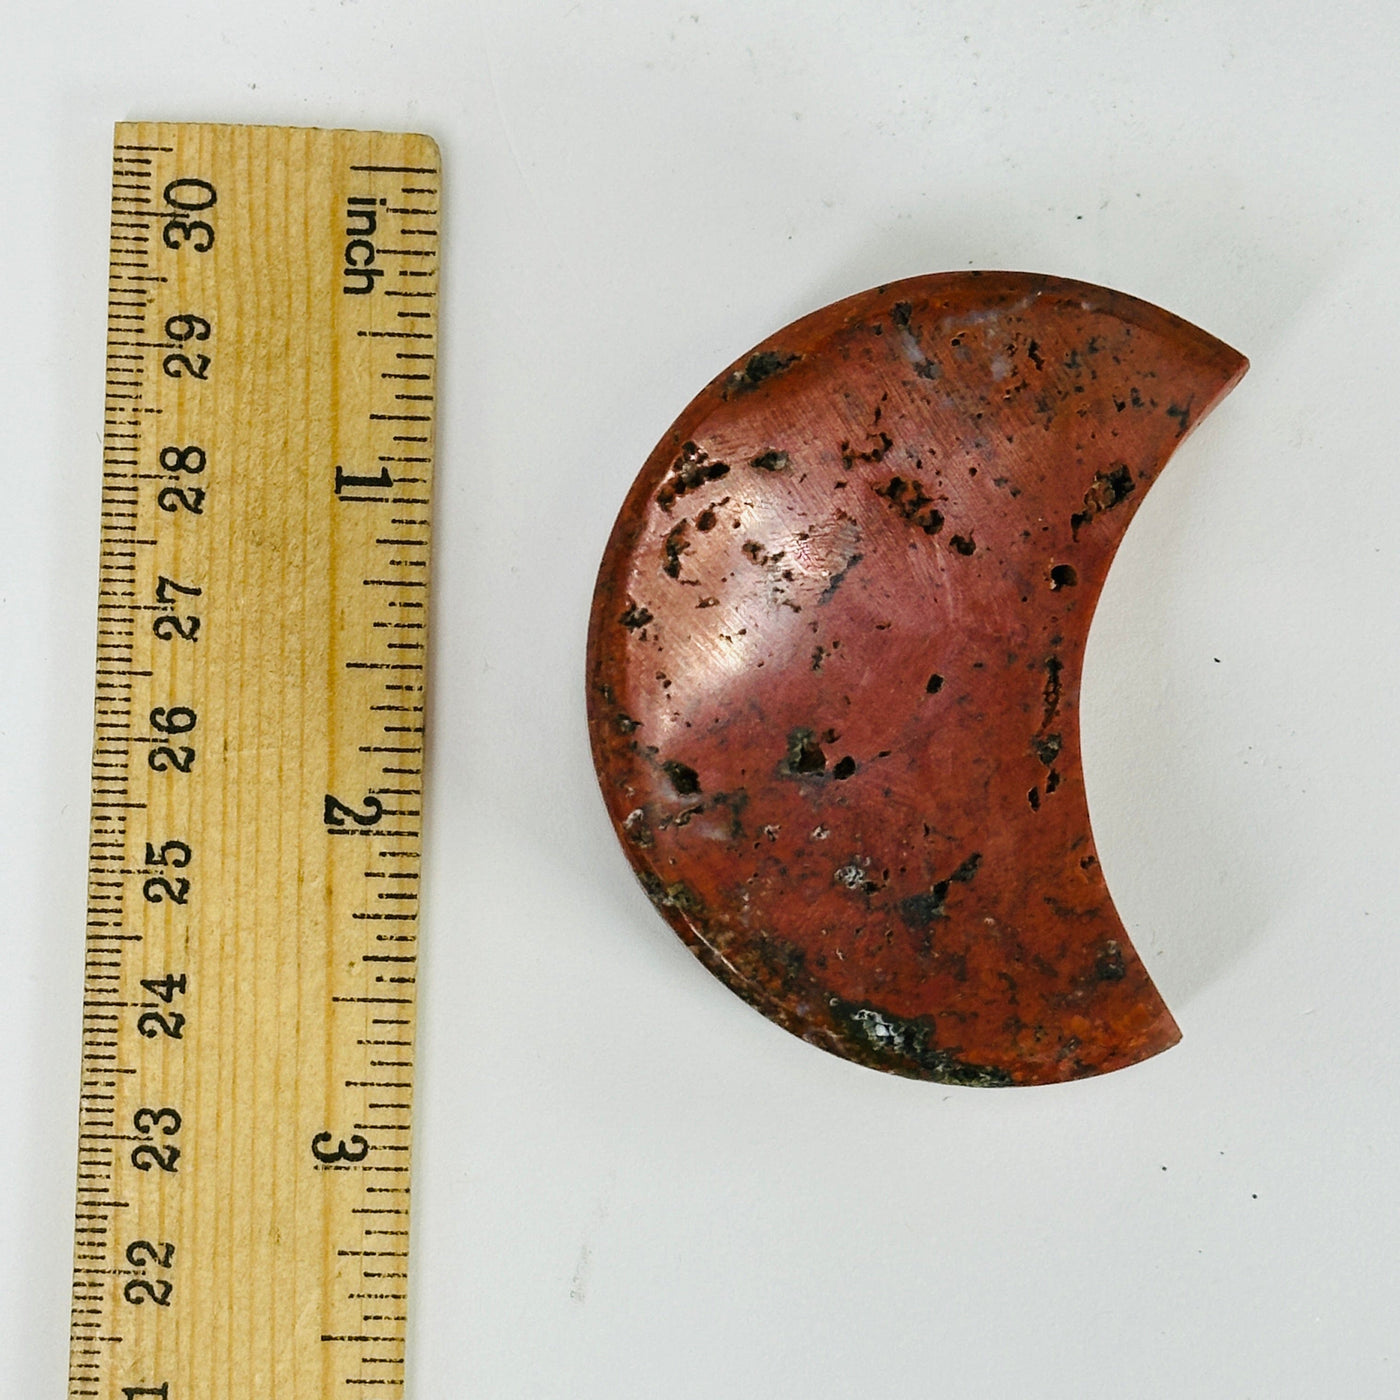 jasper moon next to a ruler for size reference